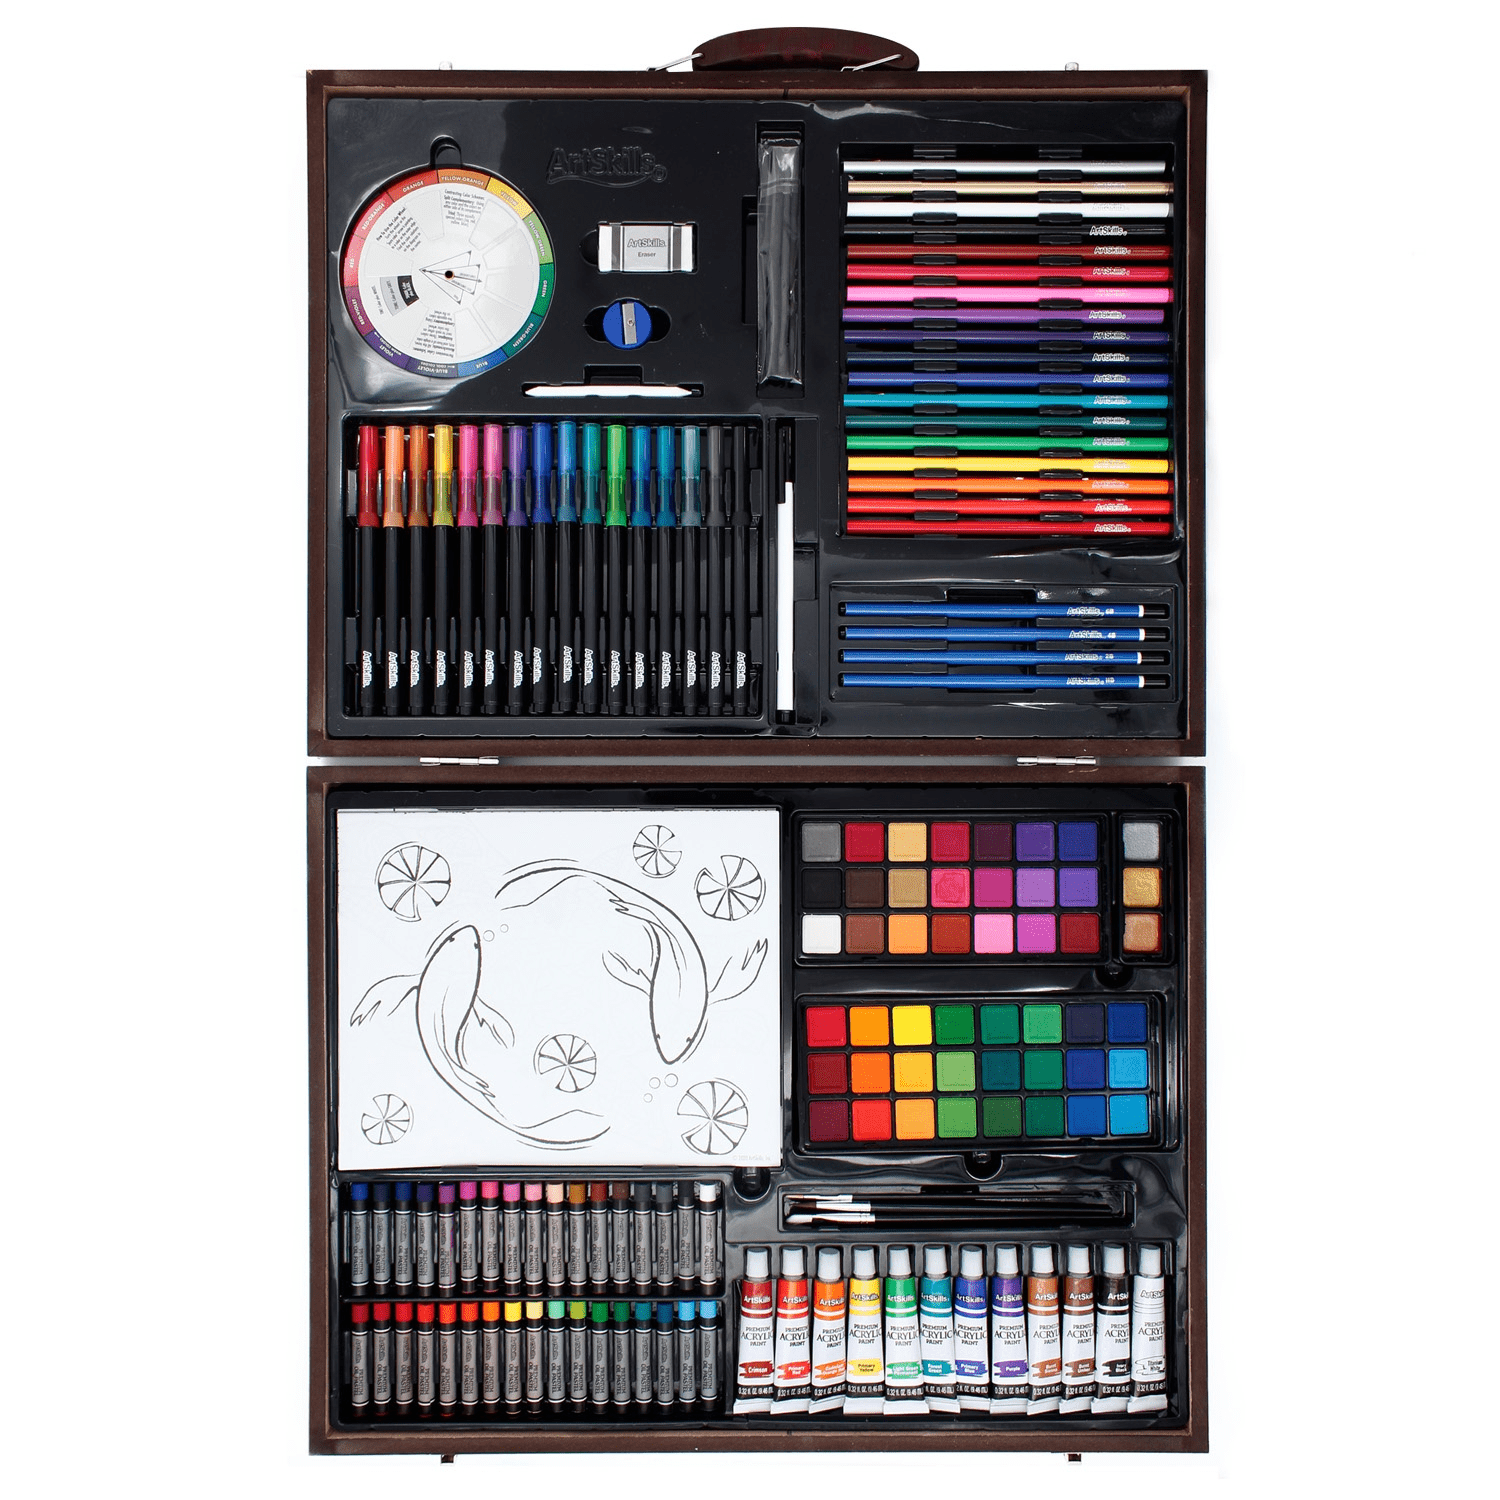 Shop Art and Painting Kits by Skill Level